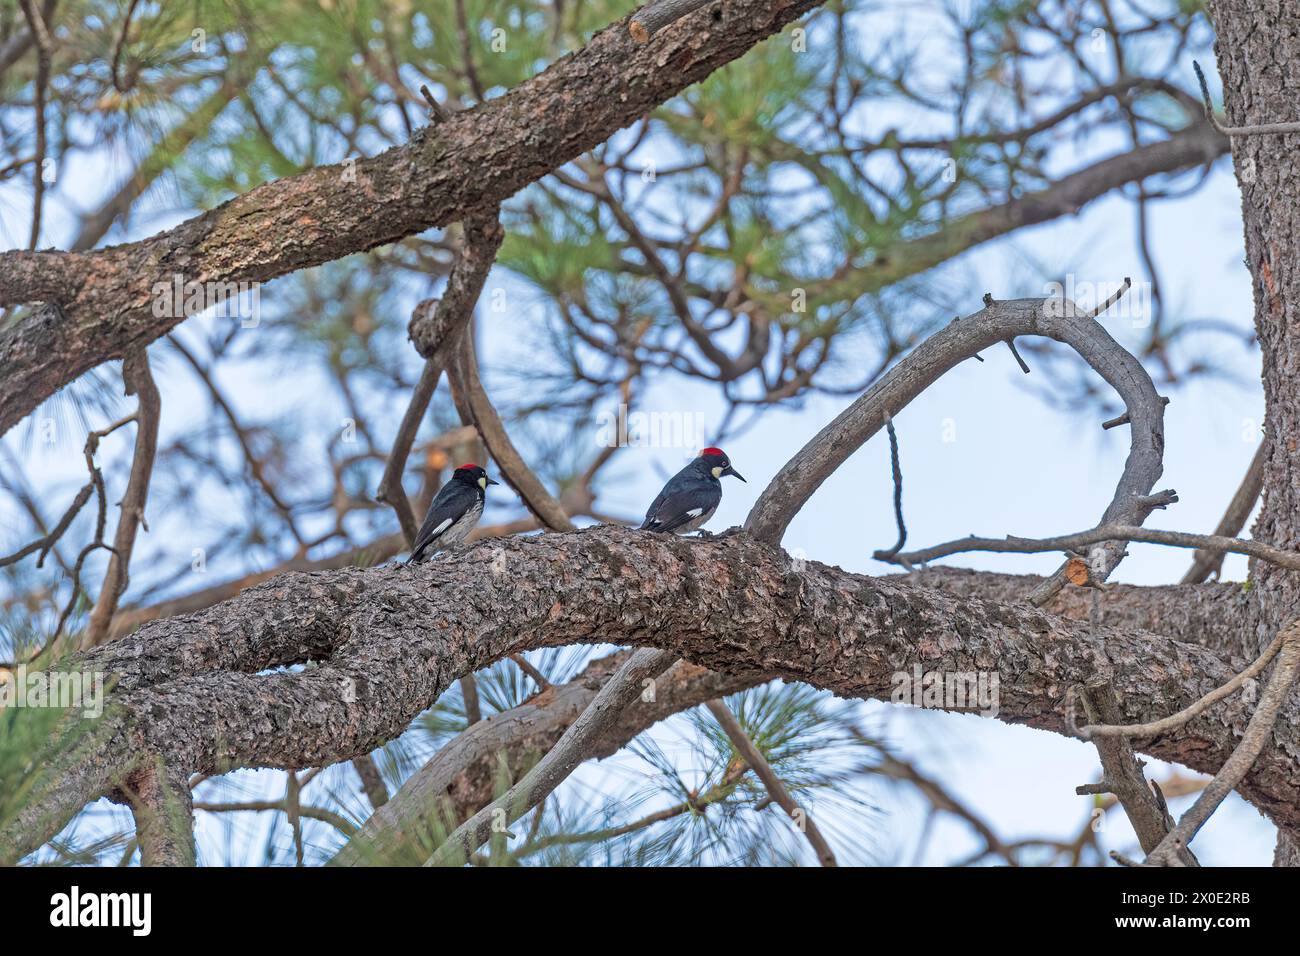 Pair of Acorn Woodpeckers on an Oak Tree in Cuyamaca Rancho State Park in California Stock Photo